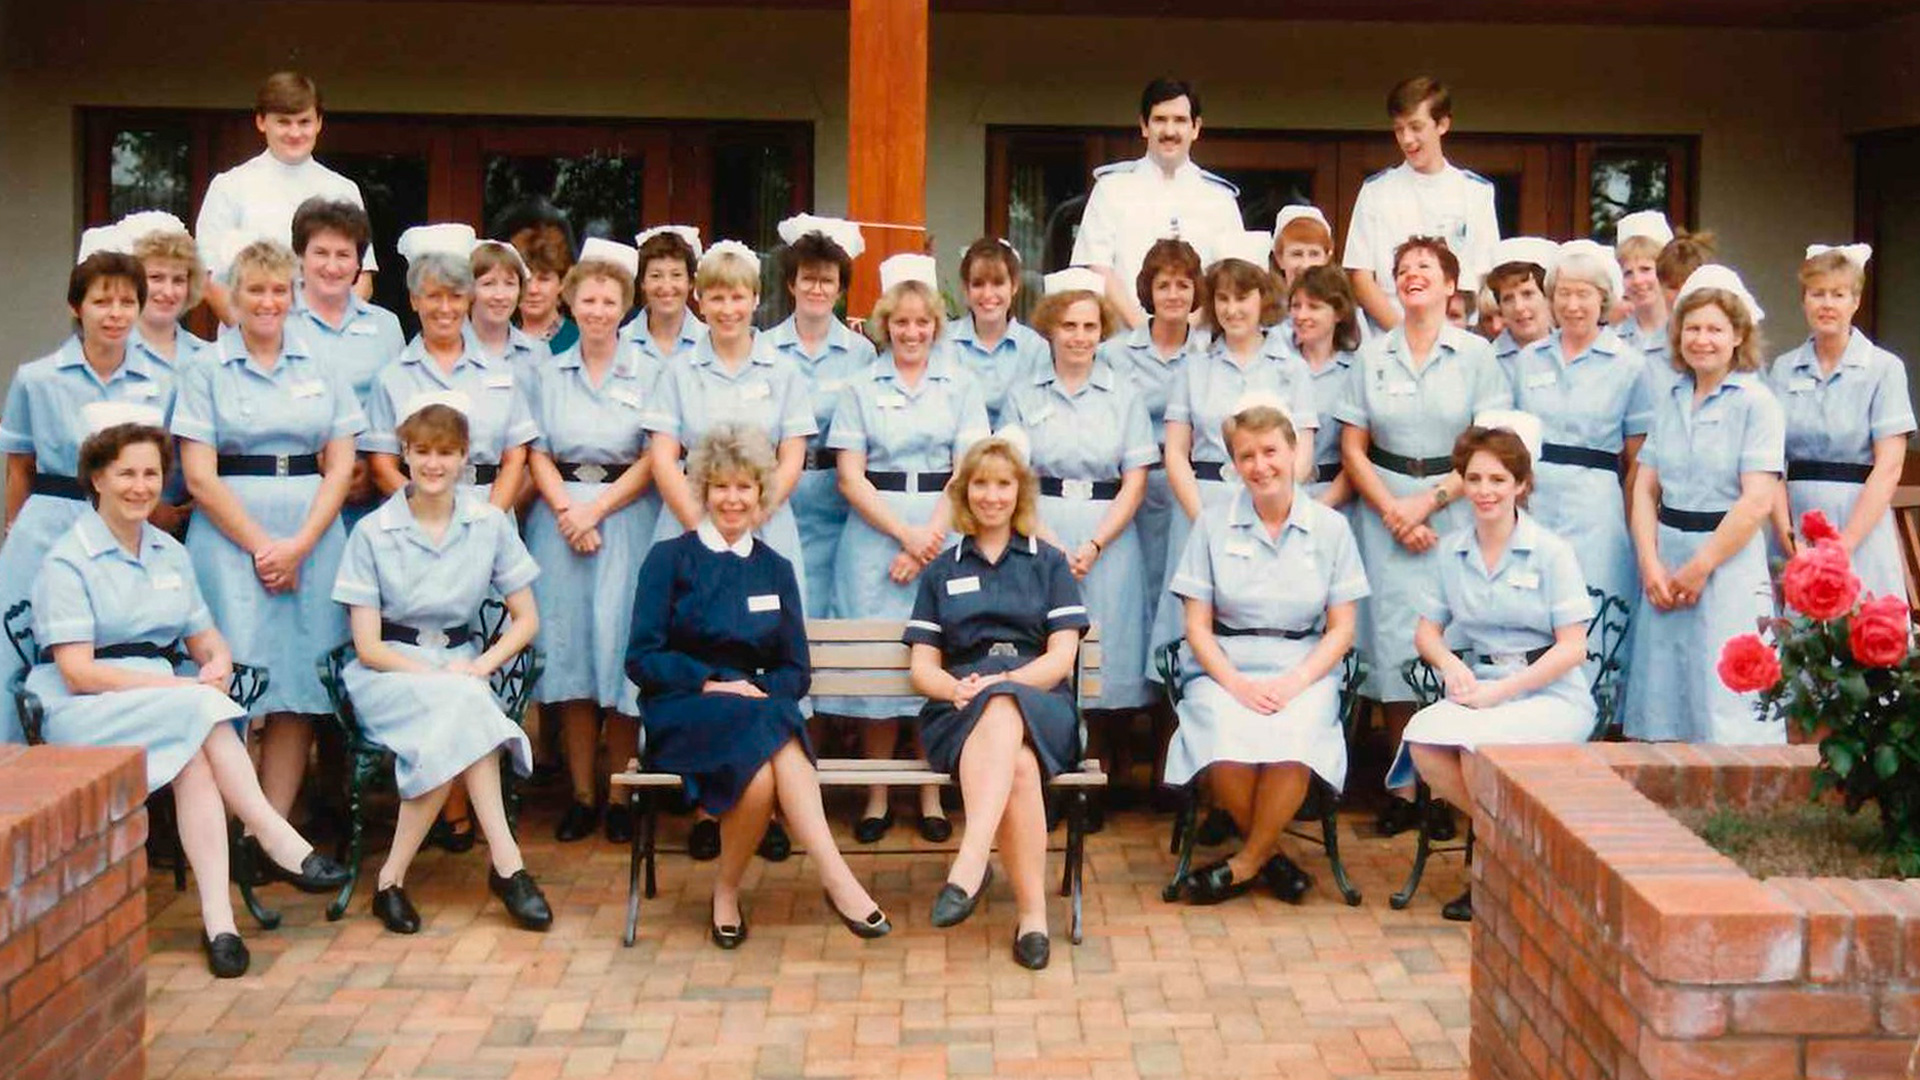 Looking back at 40 years of Hospiscare